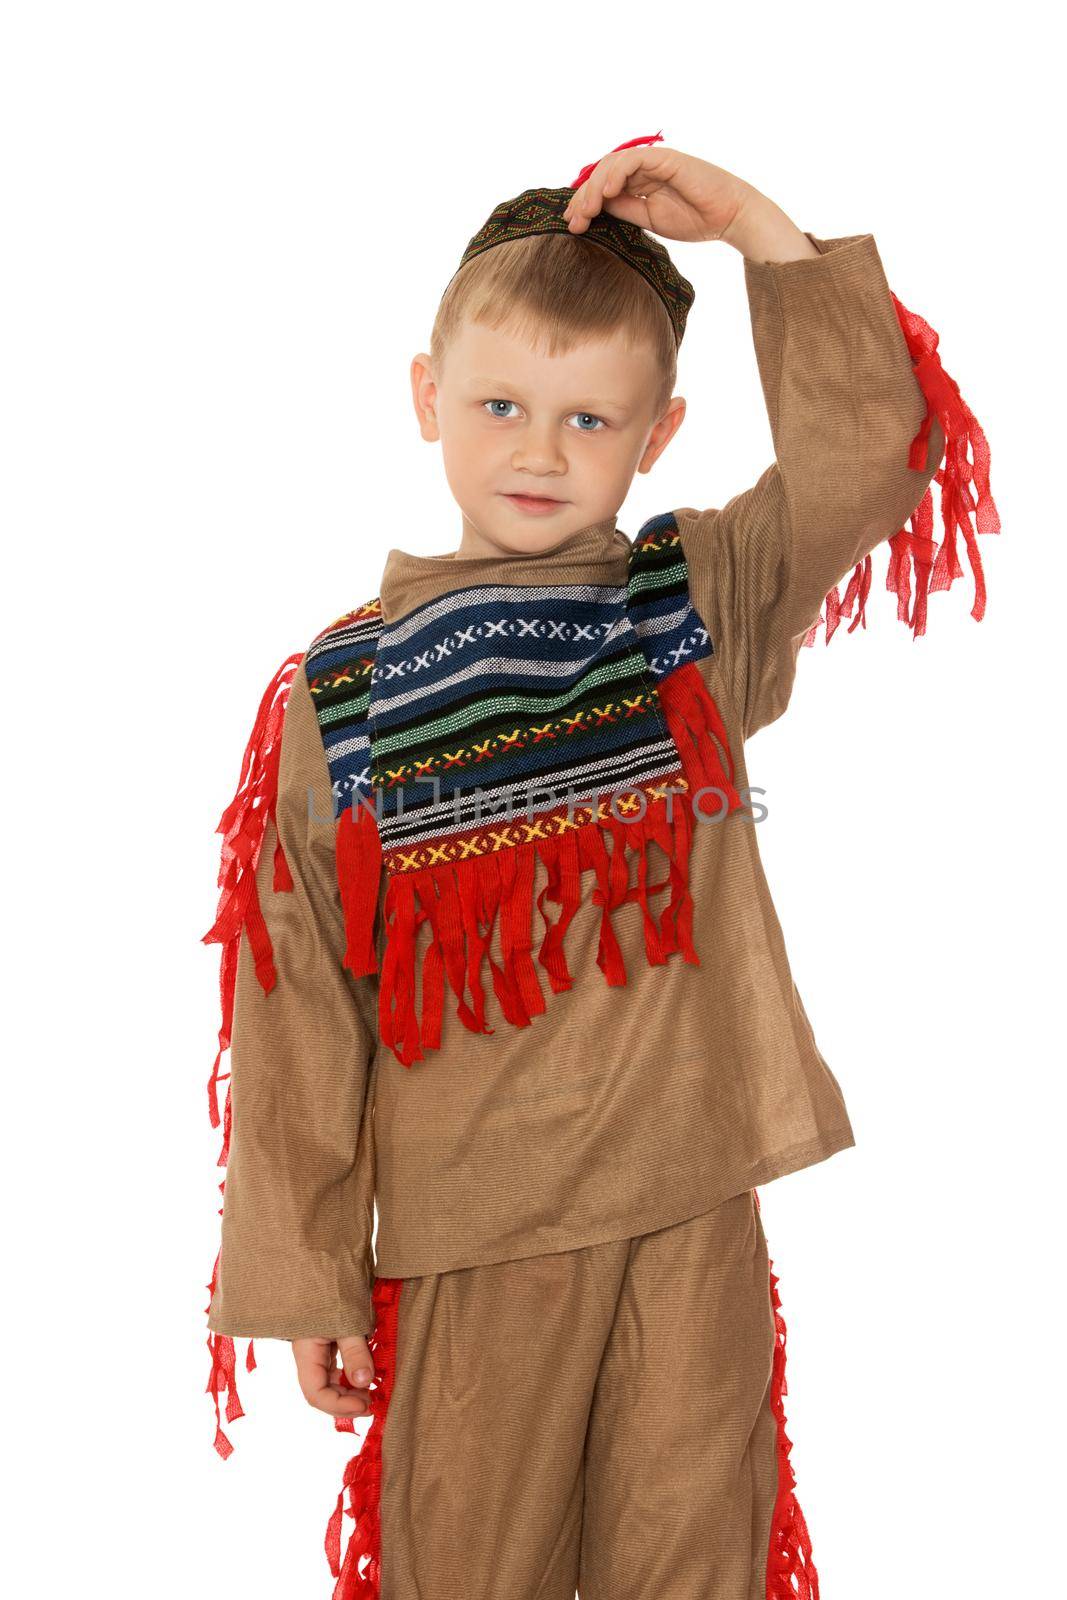 The boy in the costume of an Indian by kolesnikov_studio